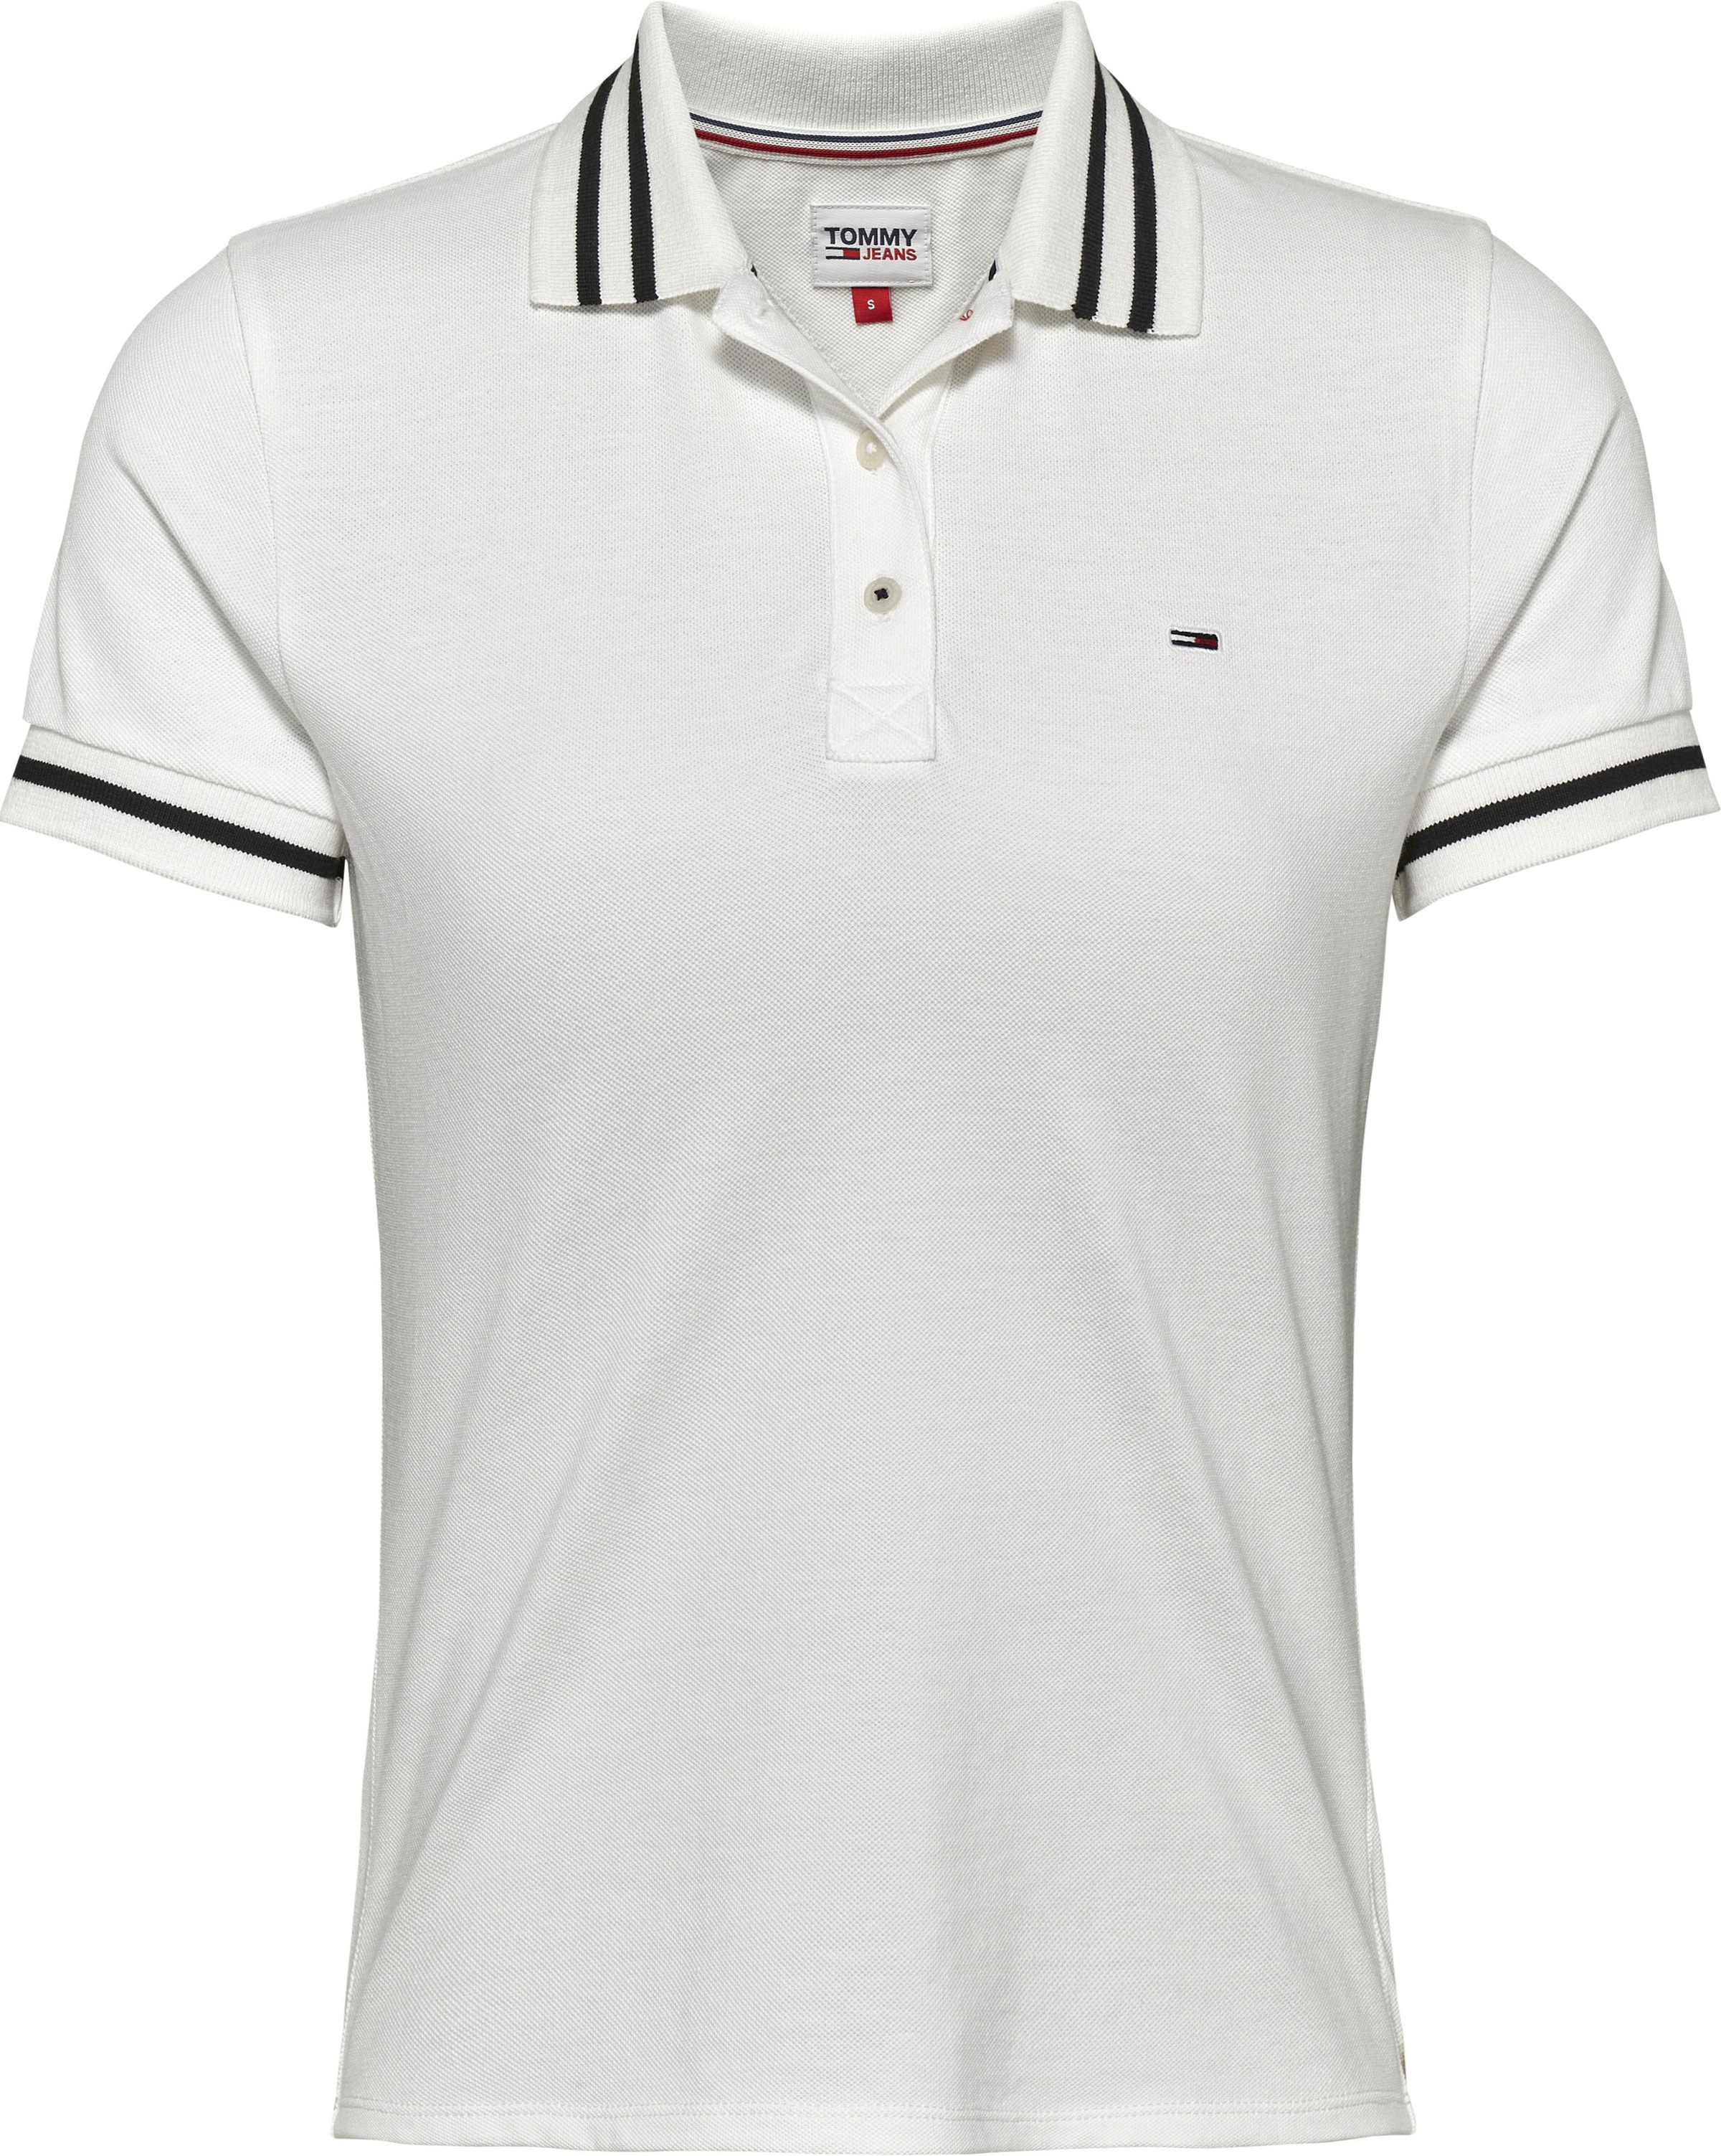 Tommy Jeans | mit Jeans I\'m & walking POLO«, Kontraststreifen ESSENTIAL TIPPING Poloshirt Tommy shoppen »TJW Label-Flag